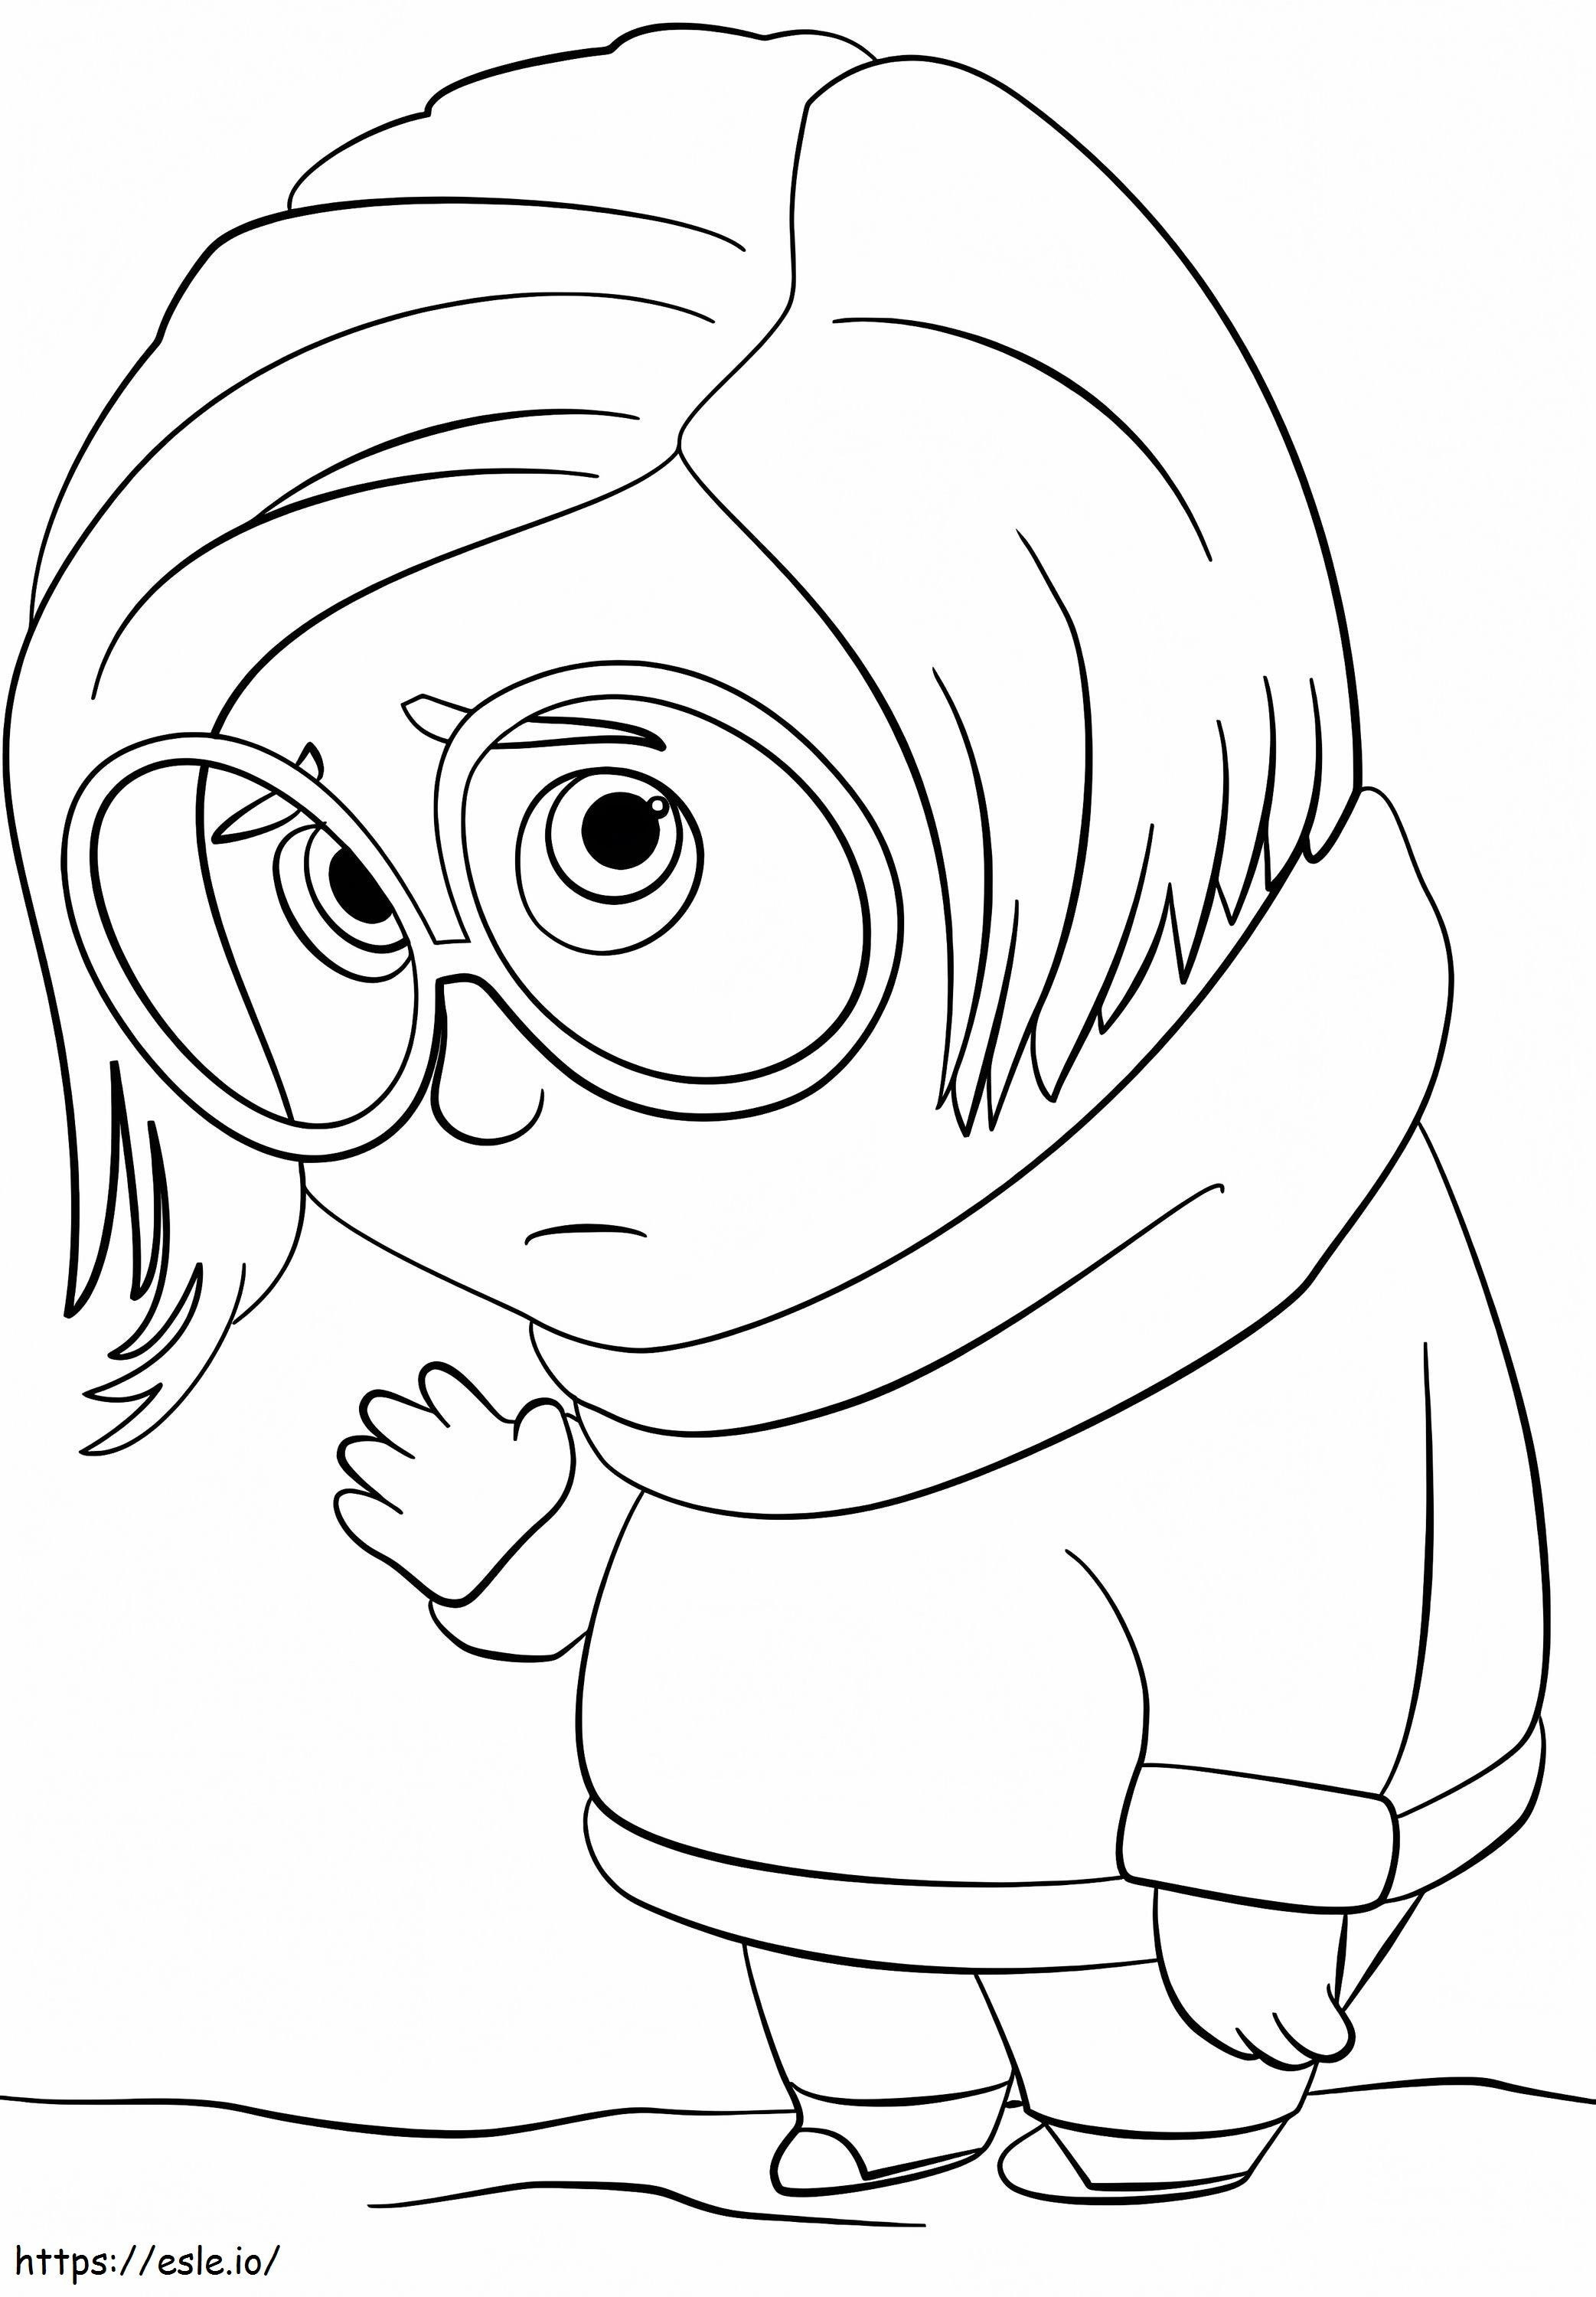 Sadness Inside Out coloring page